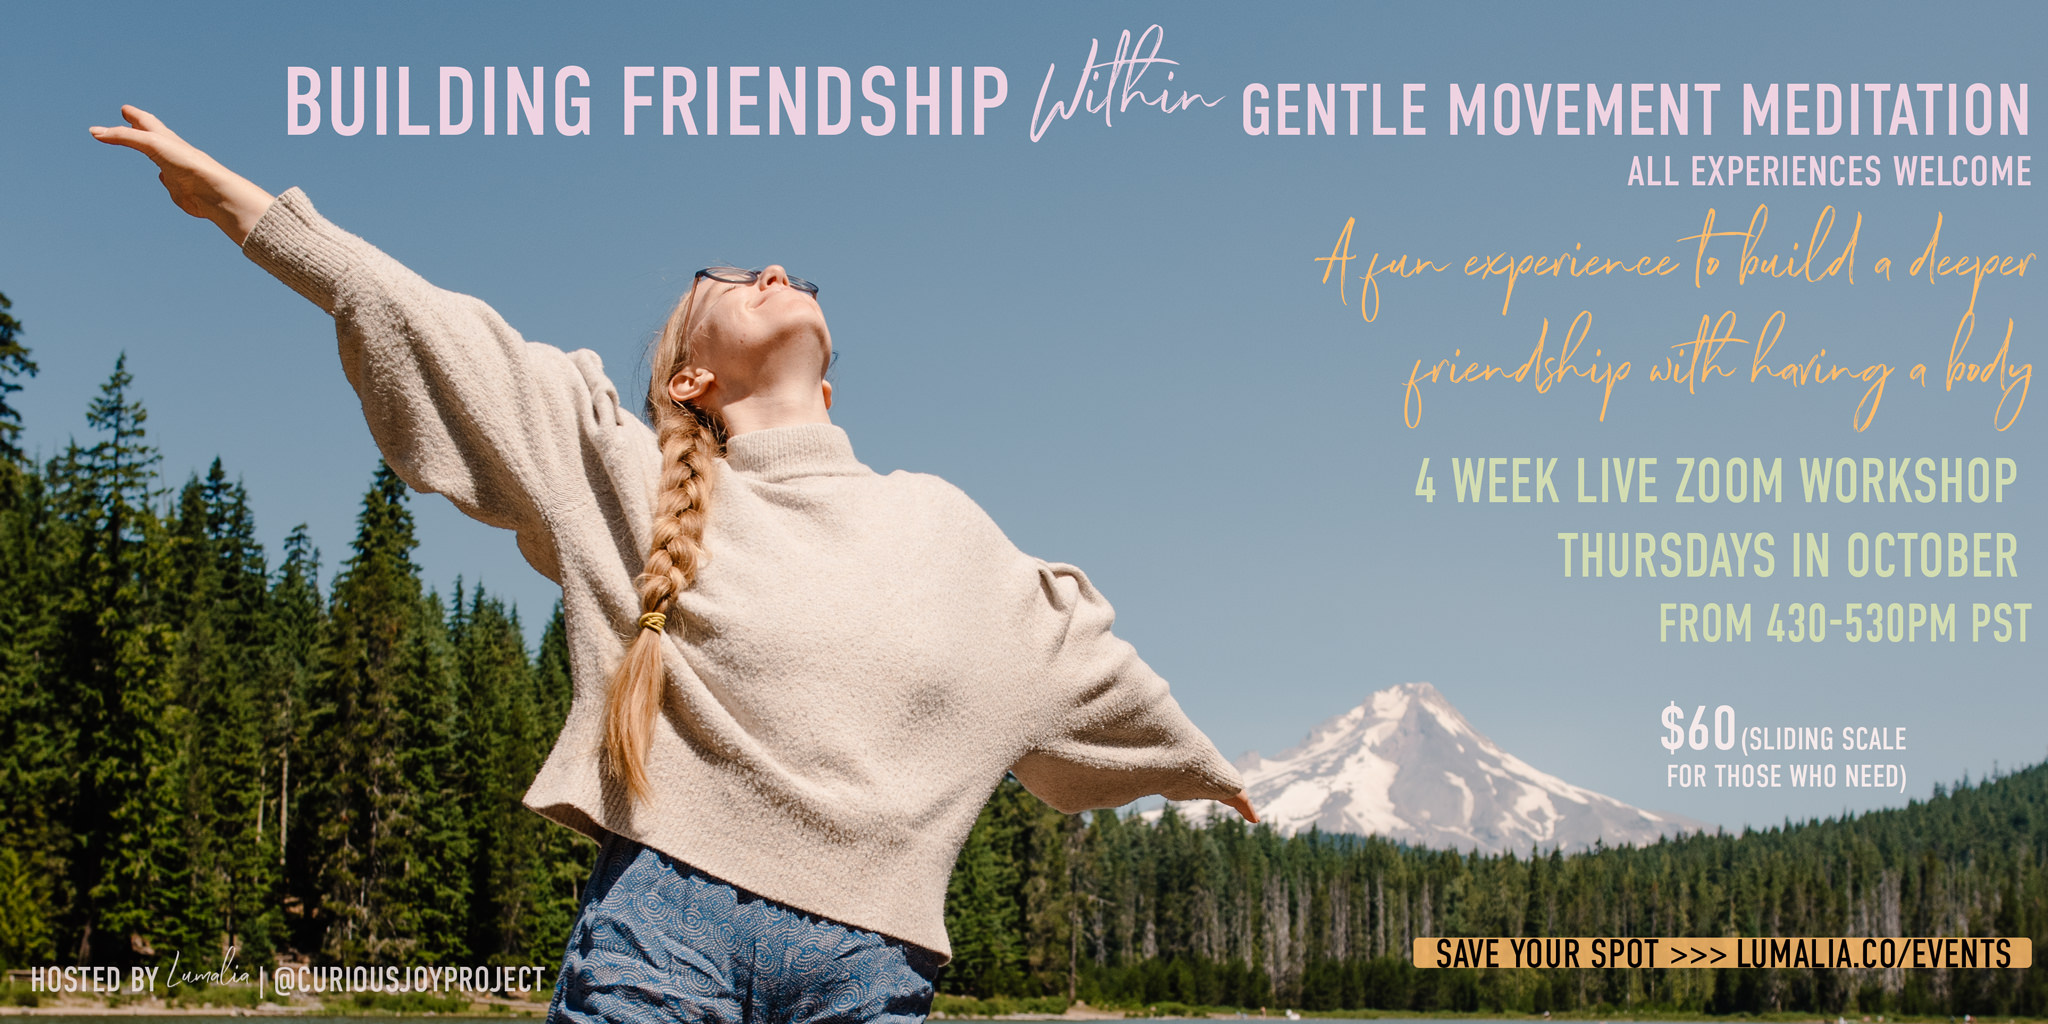 "Building Friendship Within Gentle Movement Meditation All Experiences Welcome. A fun experience to build a deeper friendship with having a body. 4 Week Live Zoom Workshop Thursdays in October  from 430-530pm PST. $60 (Sliding scale  for those who need)" Lumalia with her arms outstretched wide with a mountain the background